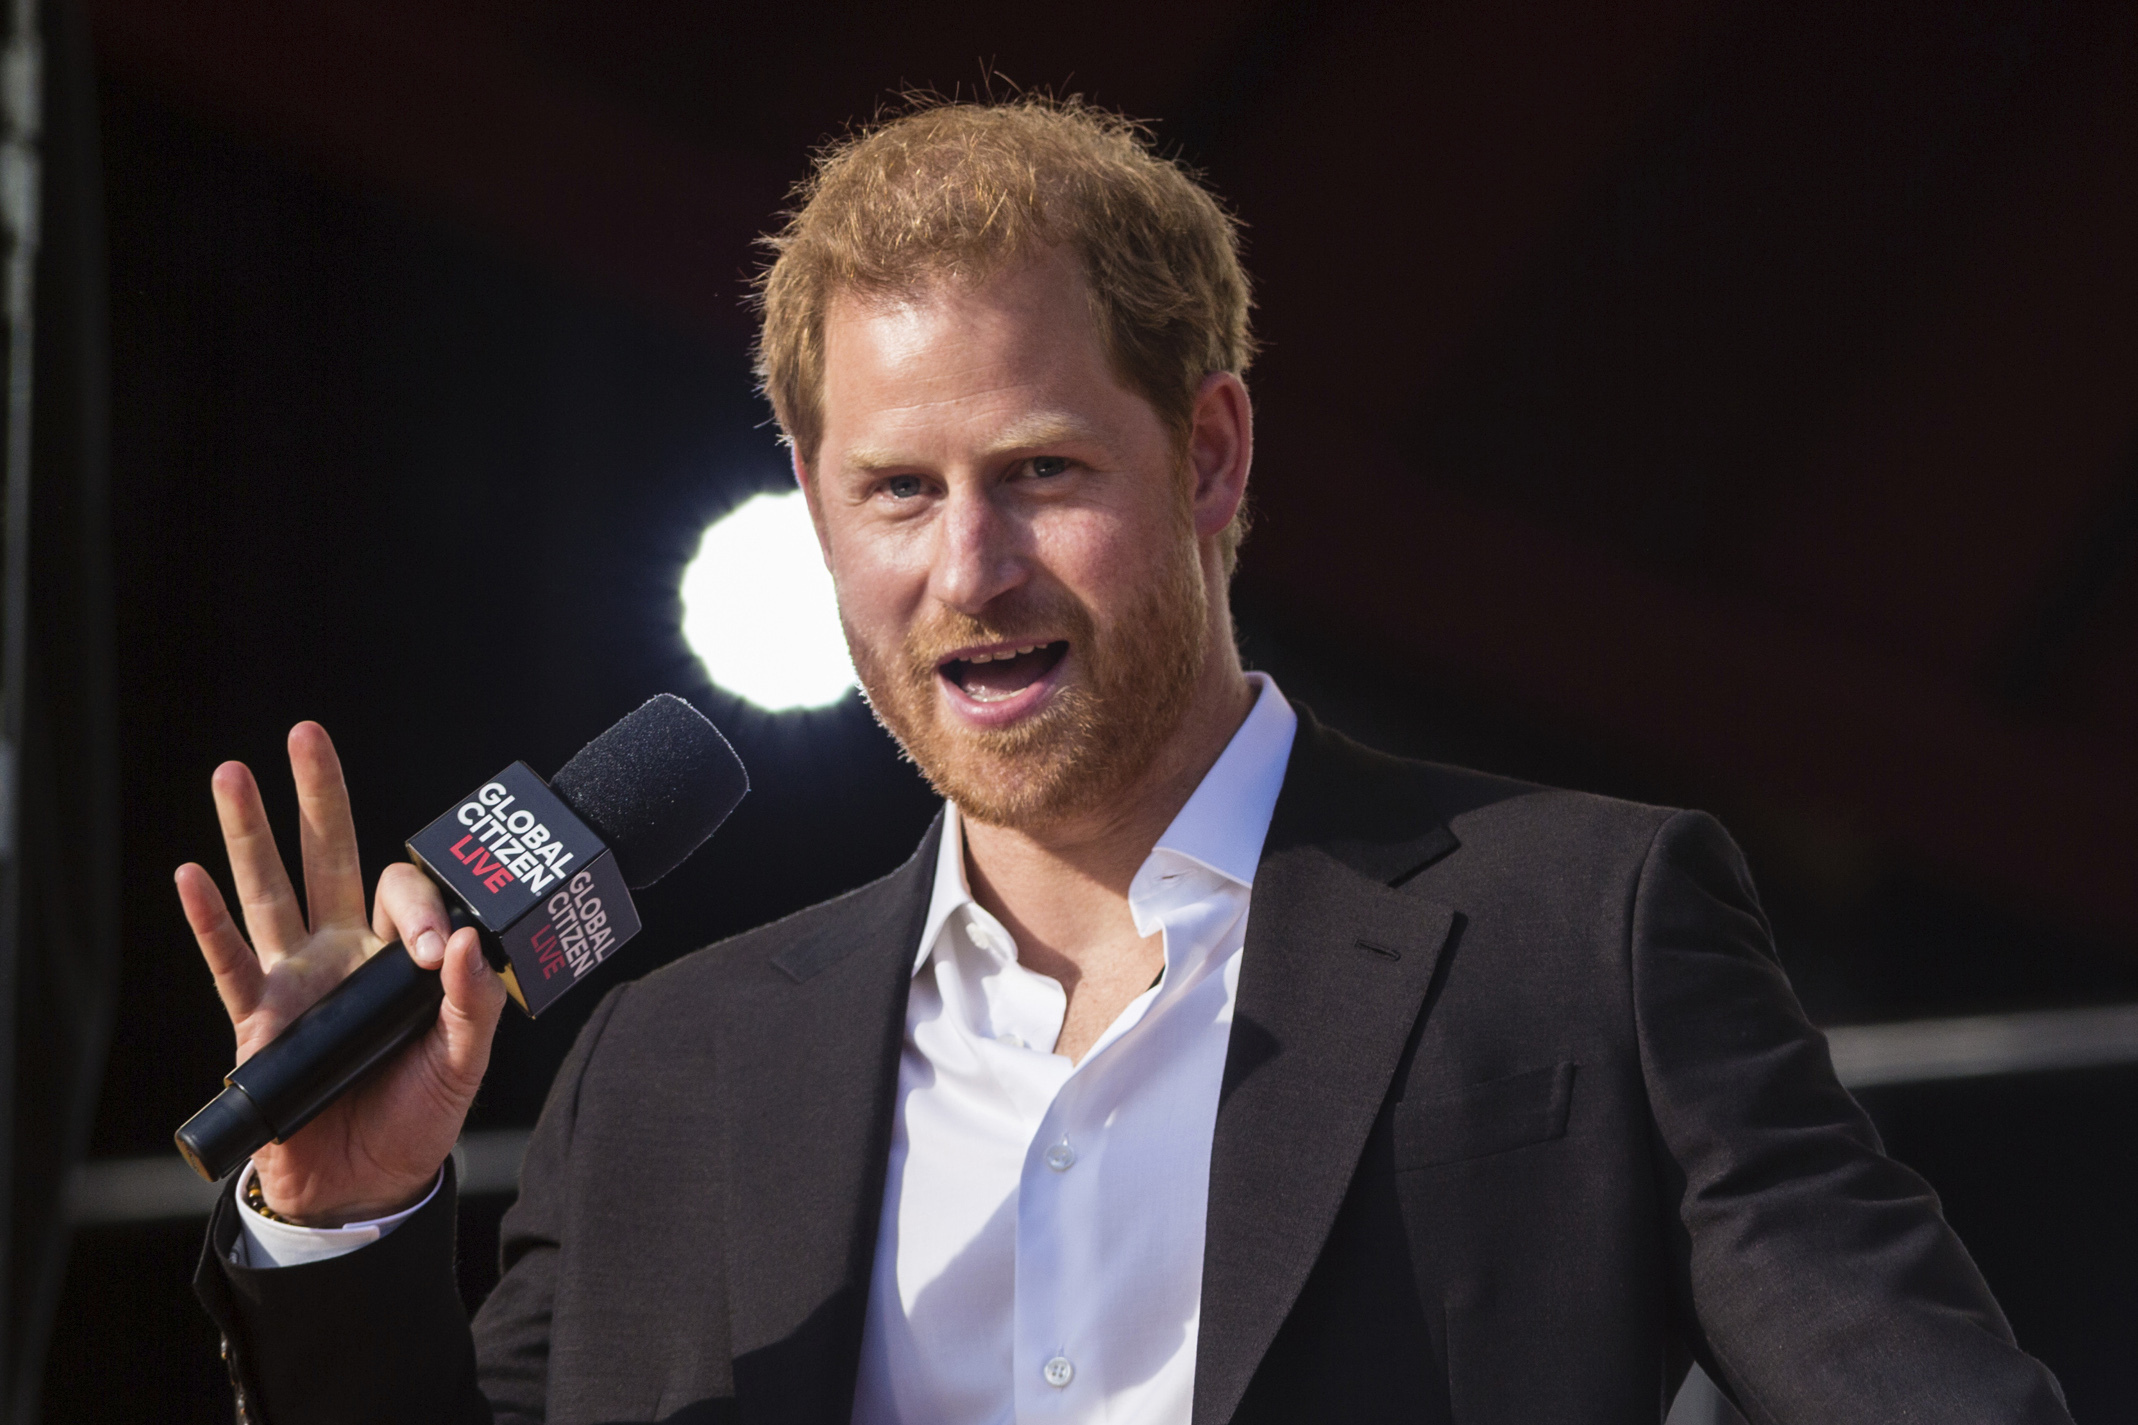 FILE - Prince Harry, Duke of Sussex, speaks during the Global Citizen festival on Sept. 25, 2021 in New York. Lawyers for Prince Harry told a court hearing on Friday that the British royal is unwilling to bring his children to his homeland because it is not safe. Harry has launched a legal challenge to the U.K. government’s refusal to let him personally pay for police protection when he comes to Britain. His legal team says Harry wants to bring his children — Archie, who is almost 3, and 8-month-old Lilibet — to visit his home country from the U.S. but that is too risky without police protection. (AP Photo/Stefan Jeremiah, File)